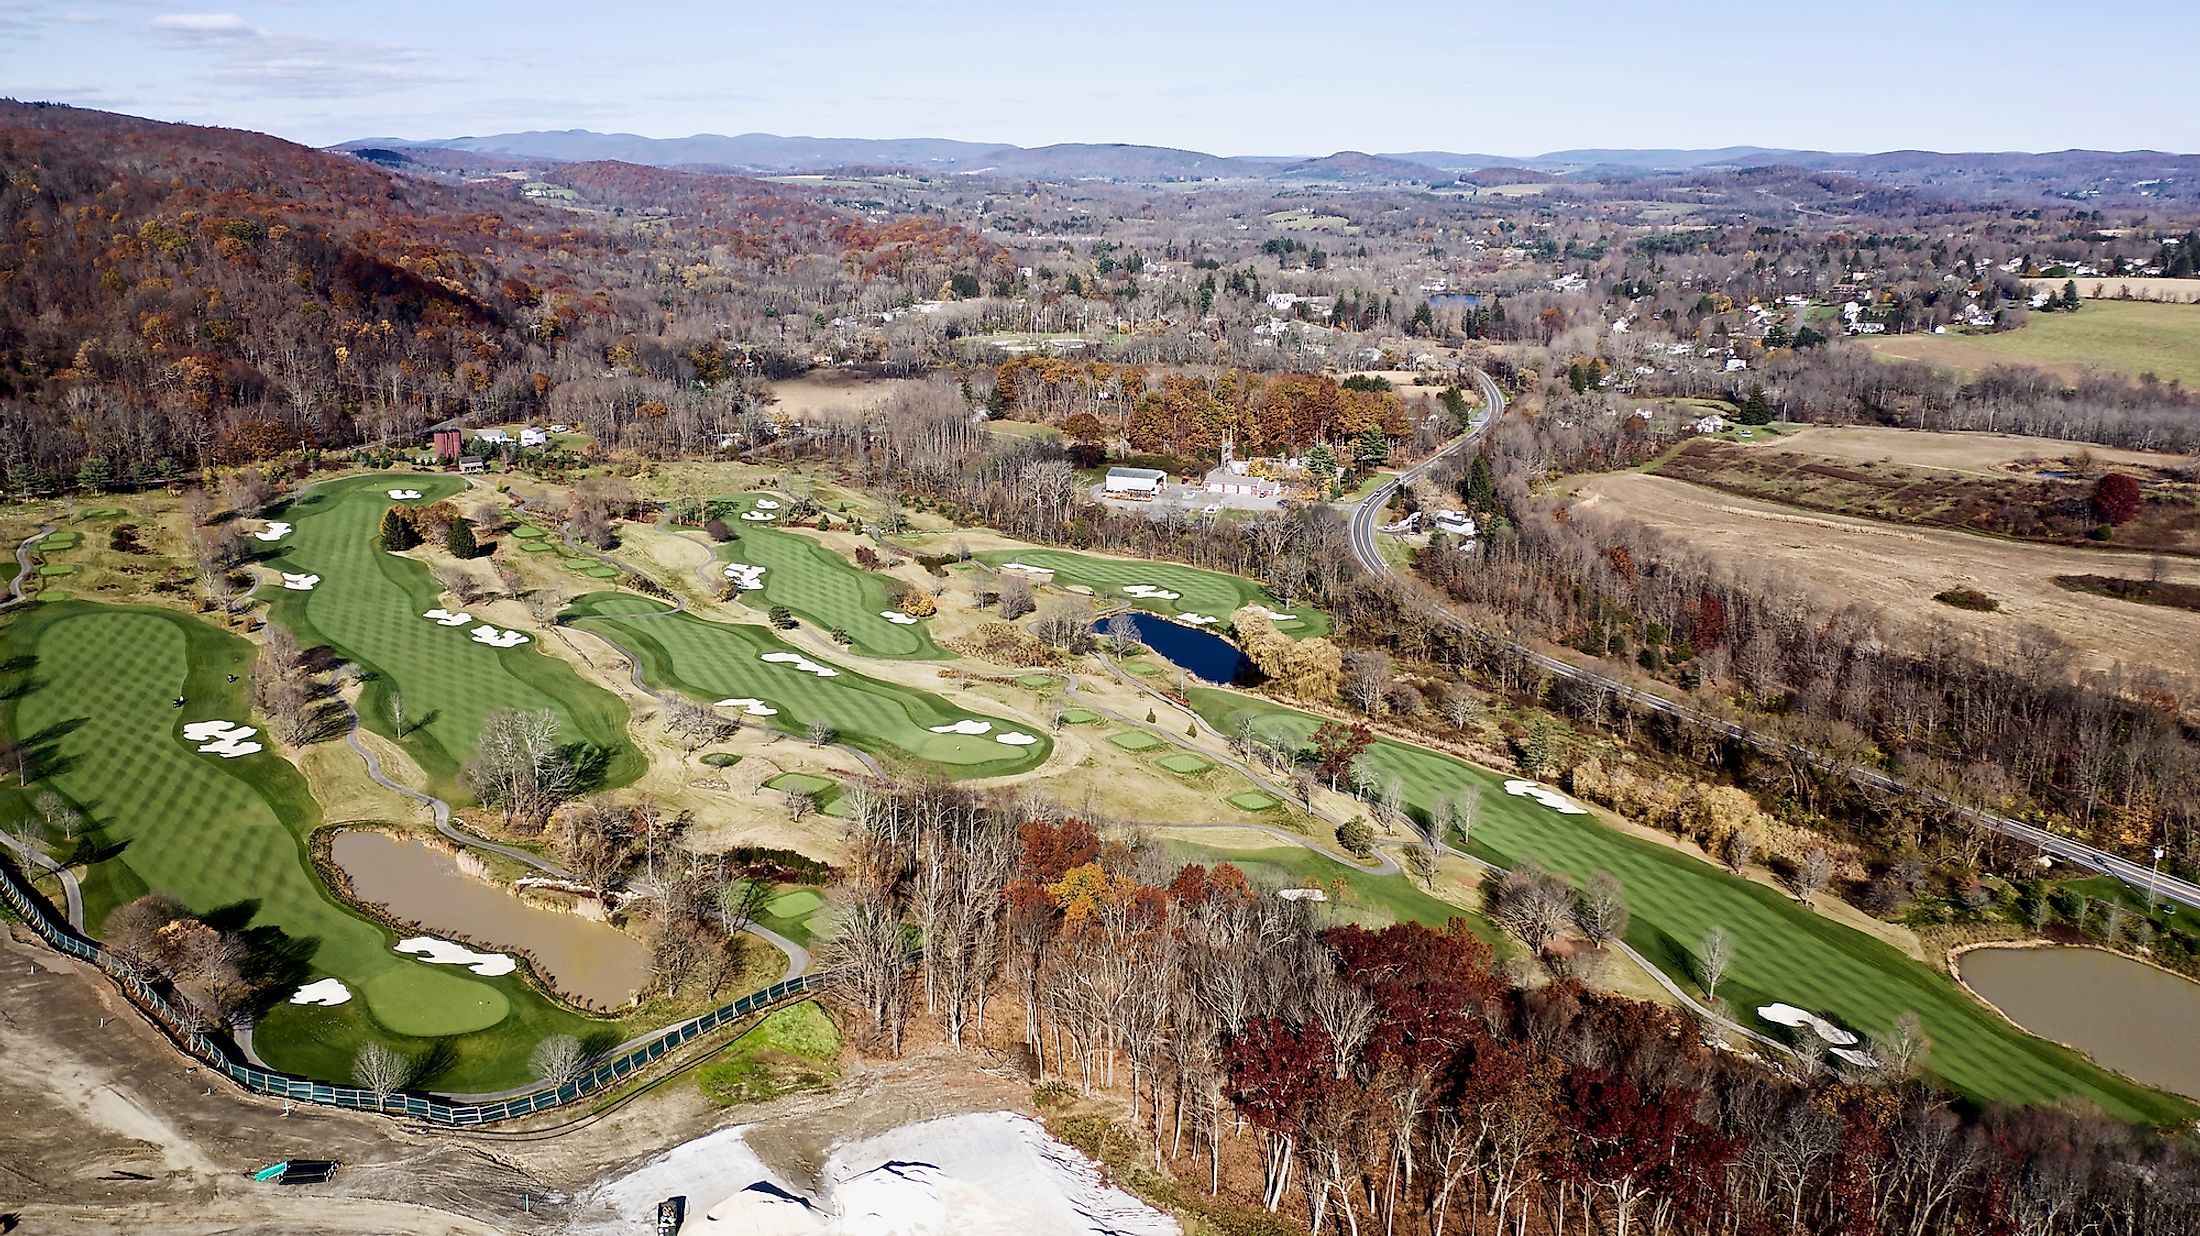 Aerial shot of a golf course in Amenia, New York.